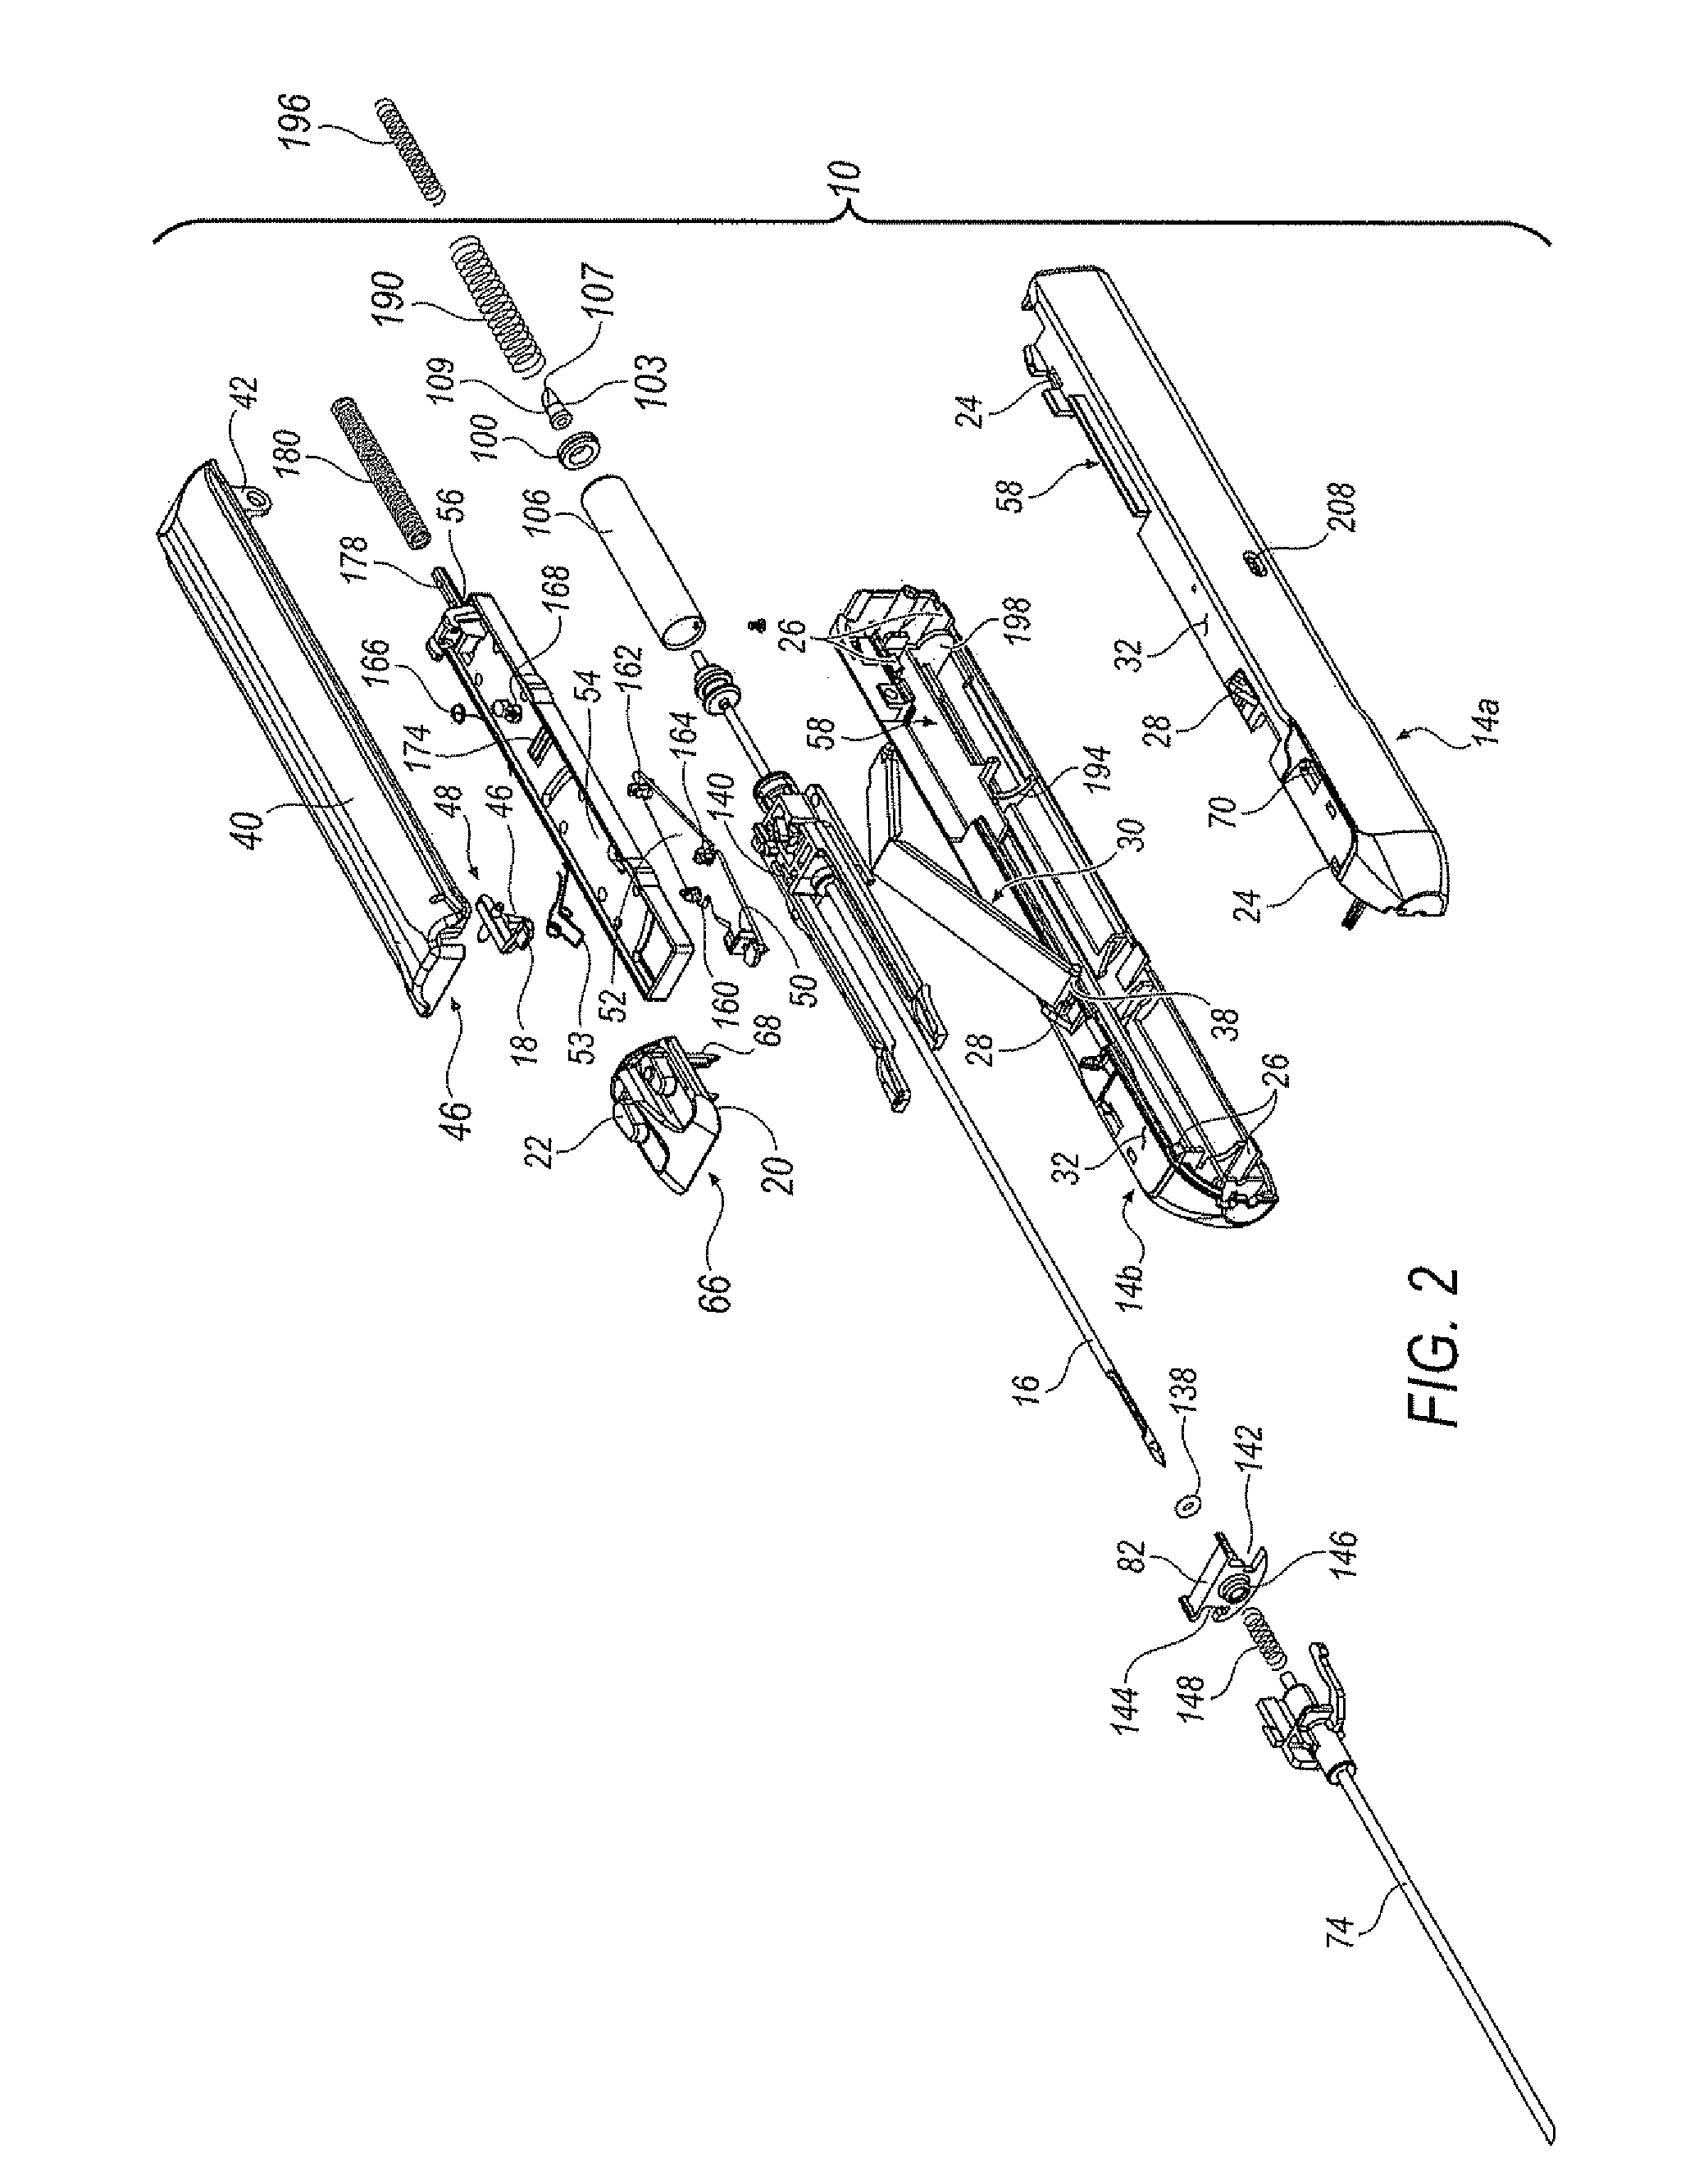 Vacuum assisted biopsy device